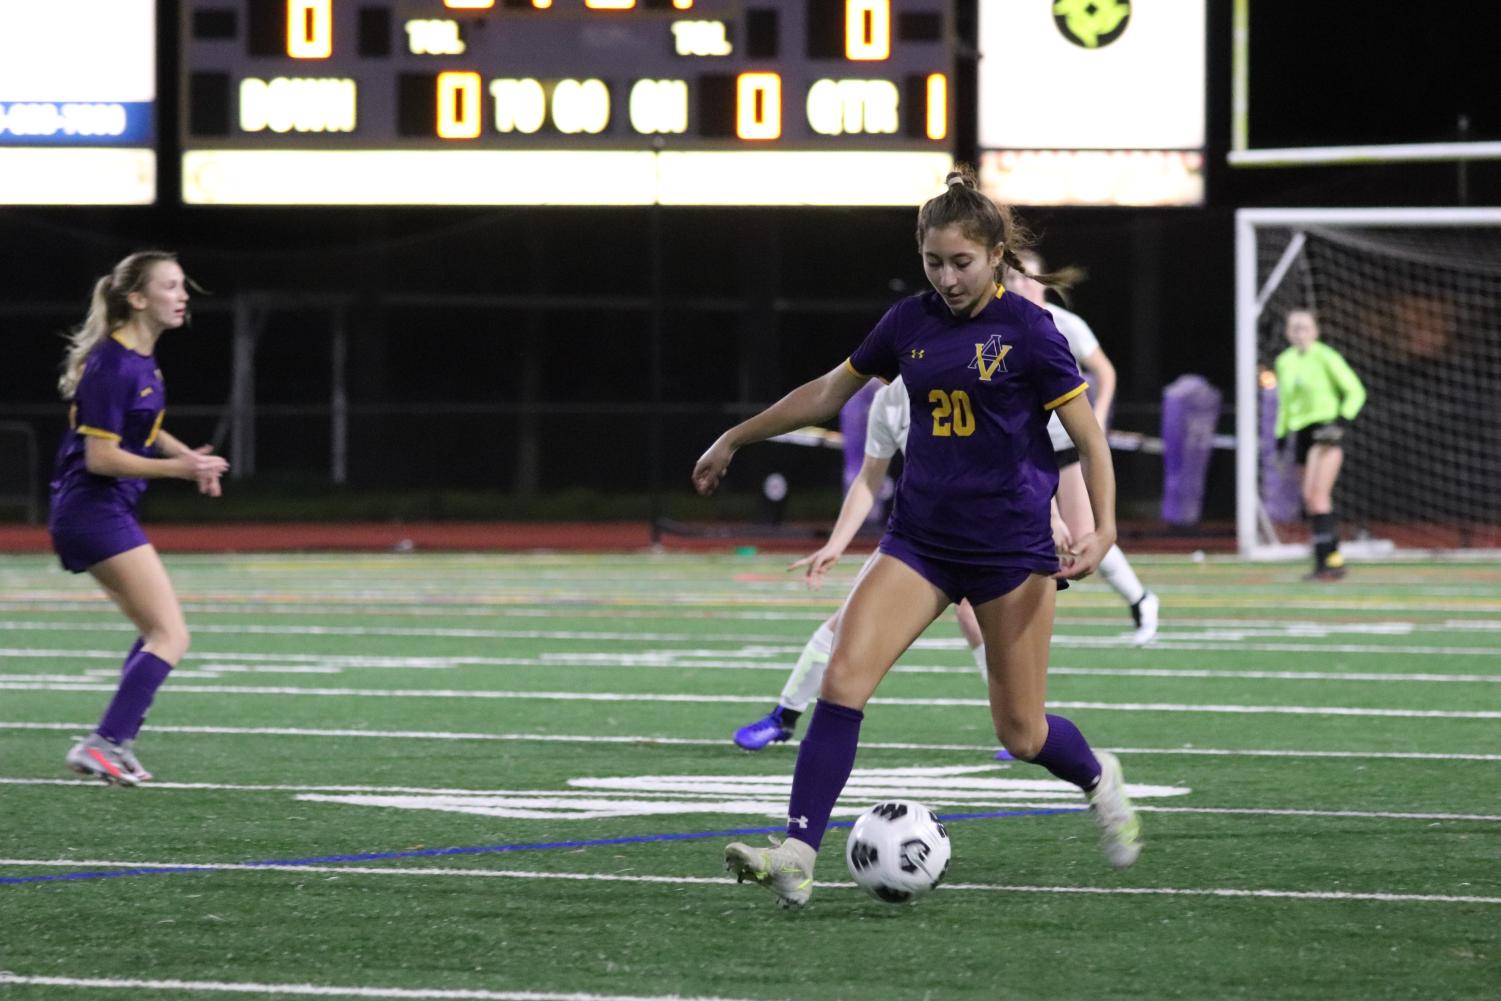 Amador+Varsity+Girls+Soccer+kick+off+the+first+half+of+the+season+undefeated